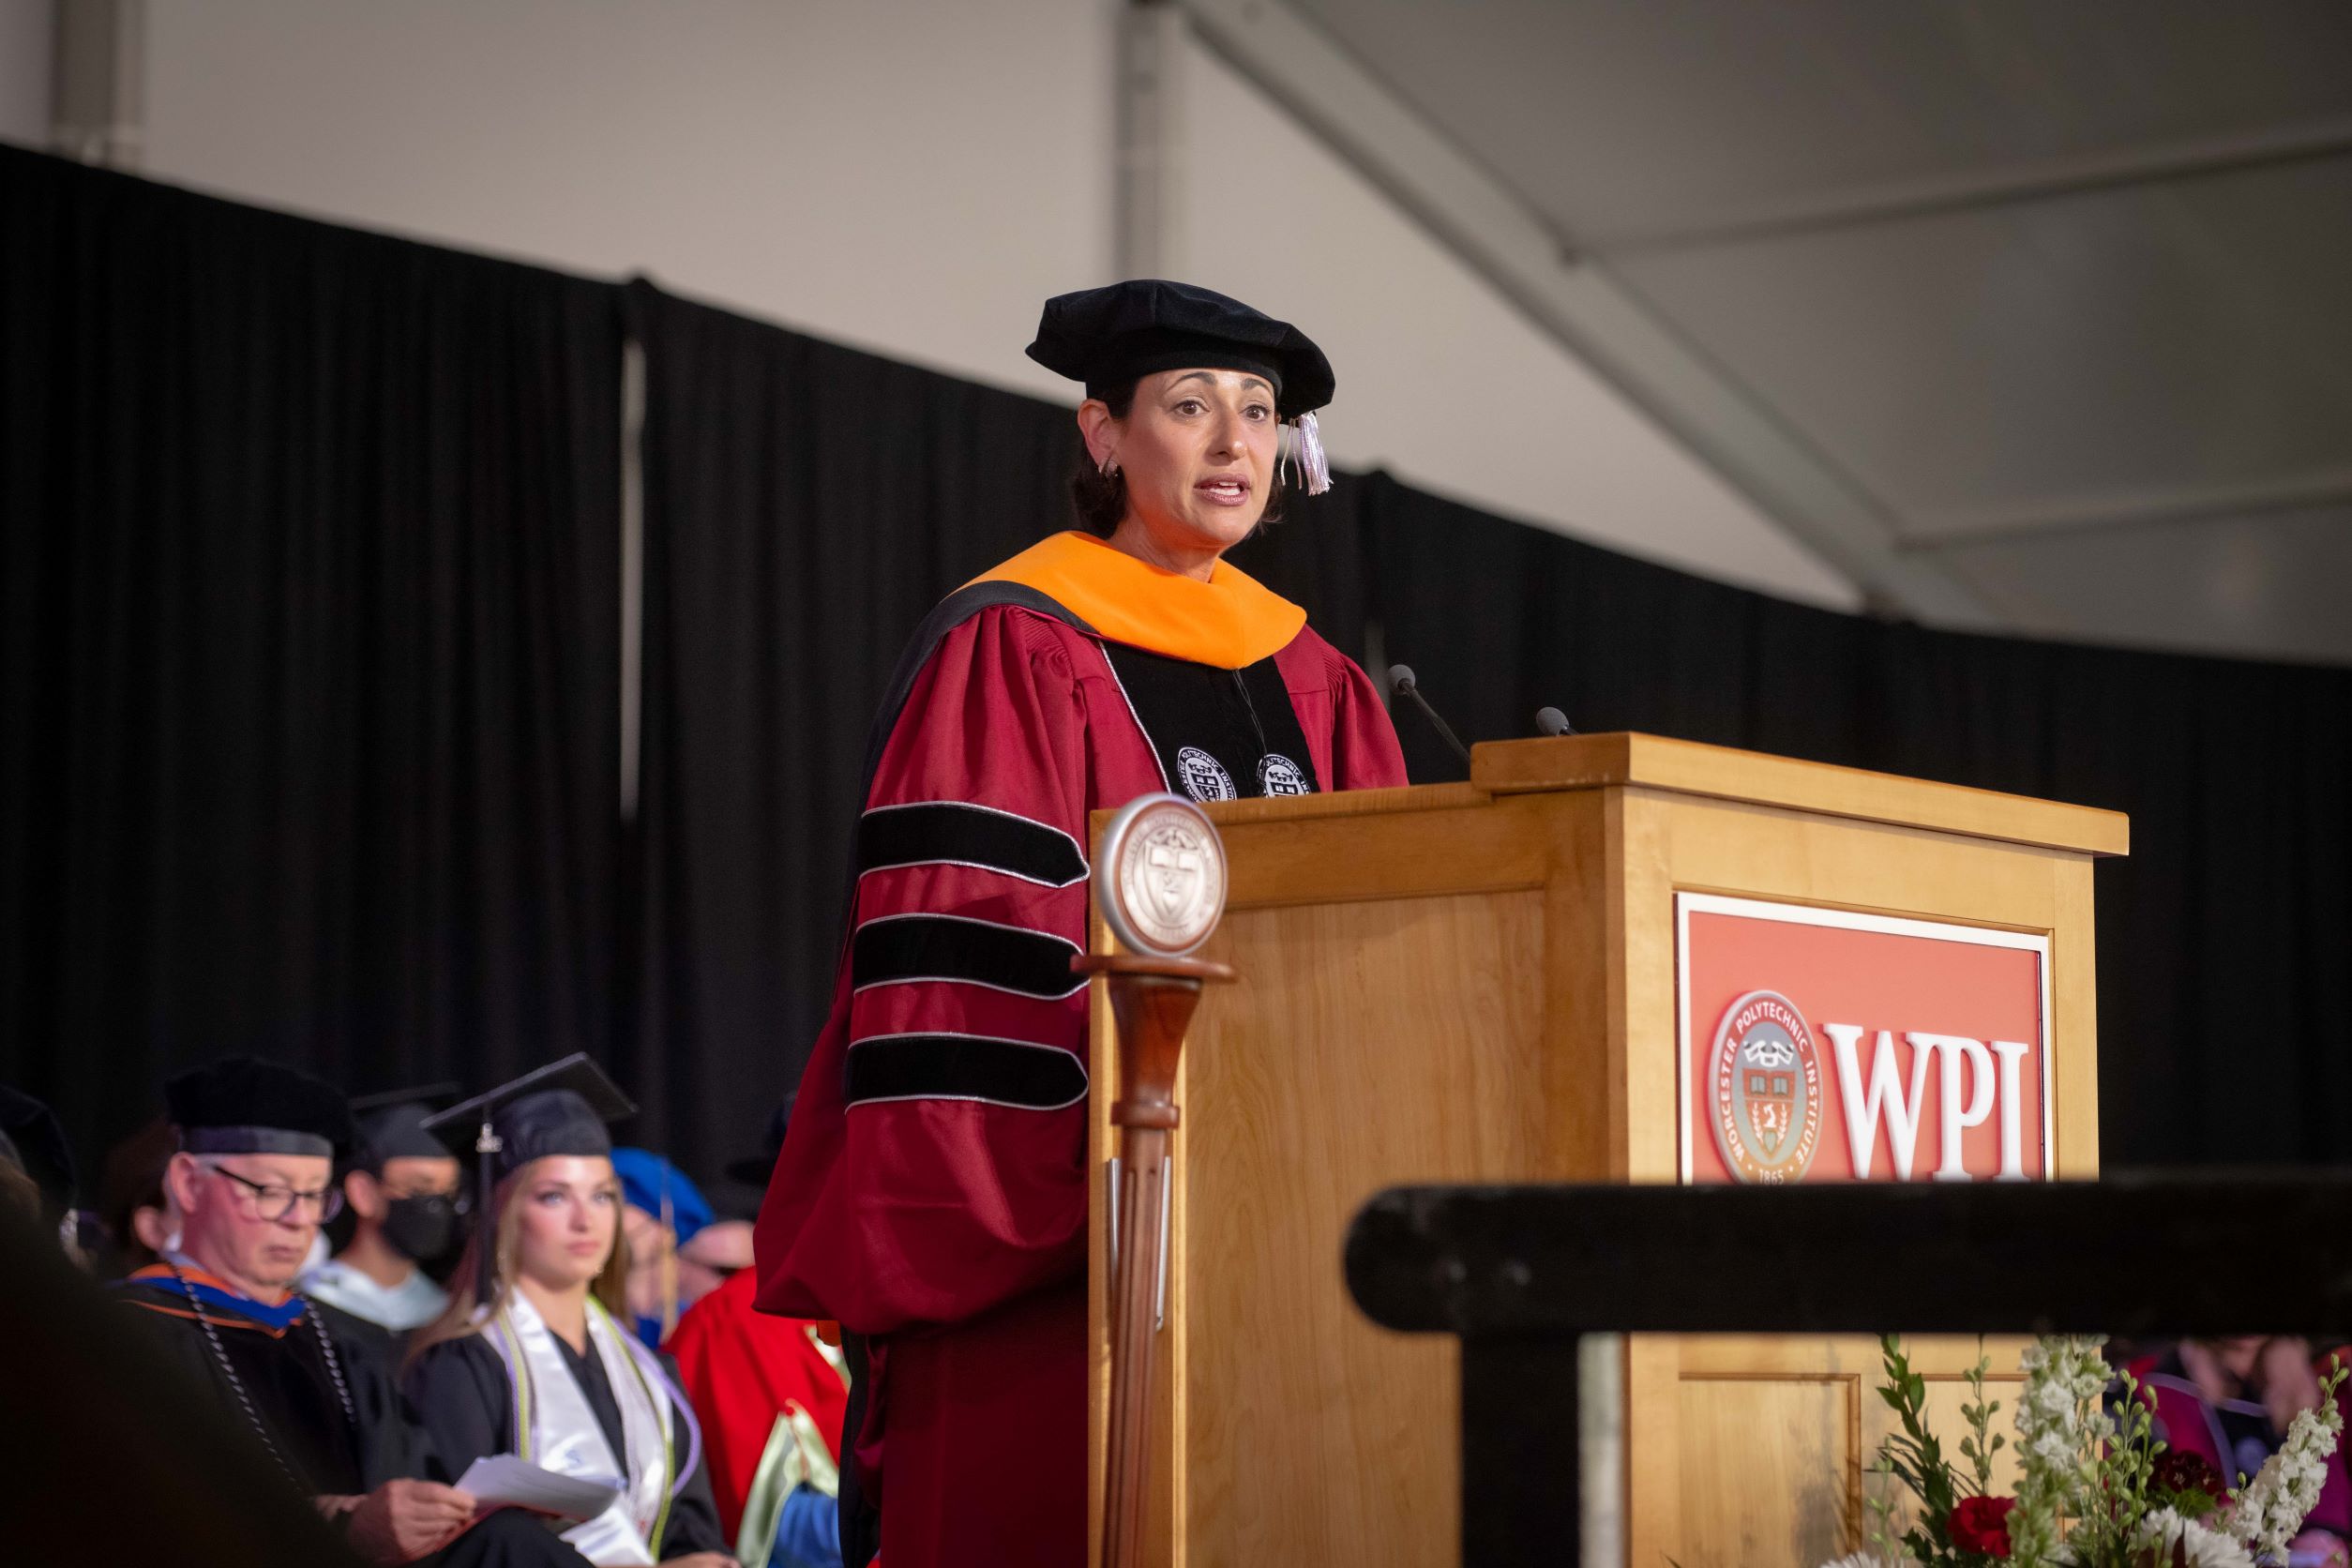 Rochelle Walensky delivers the Commencement address at WPI